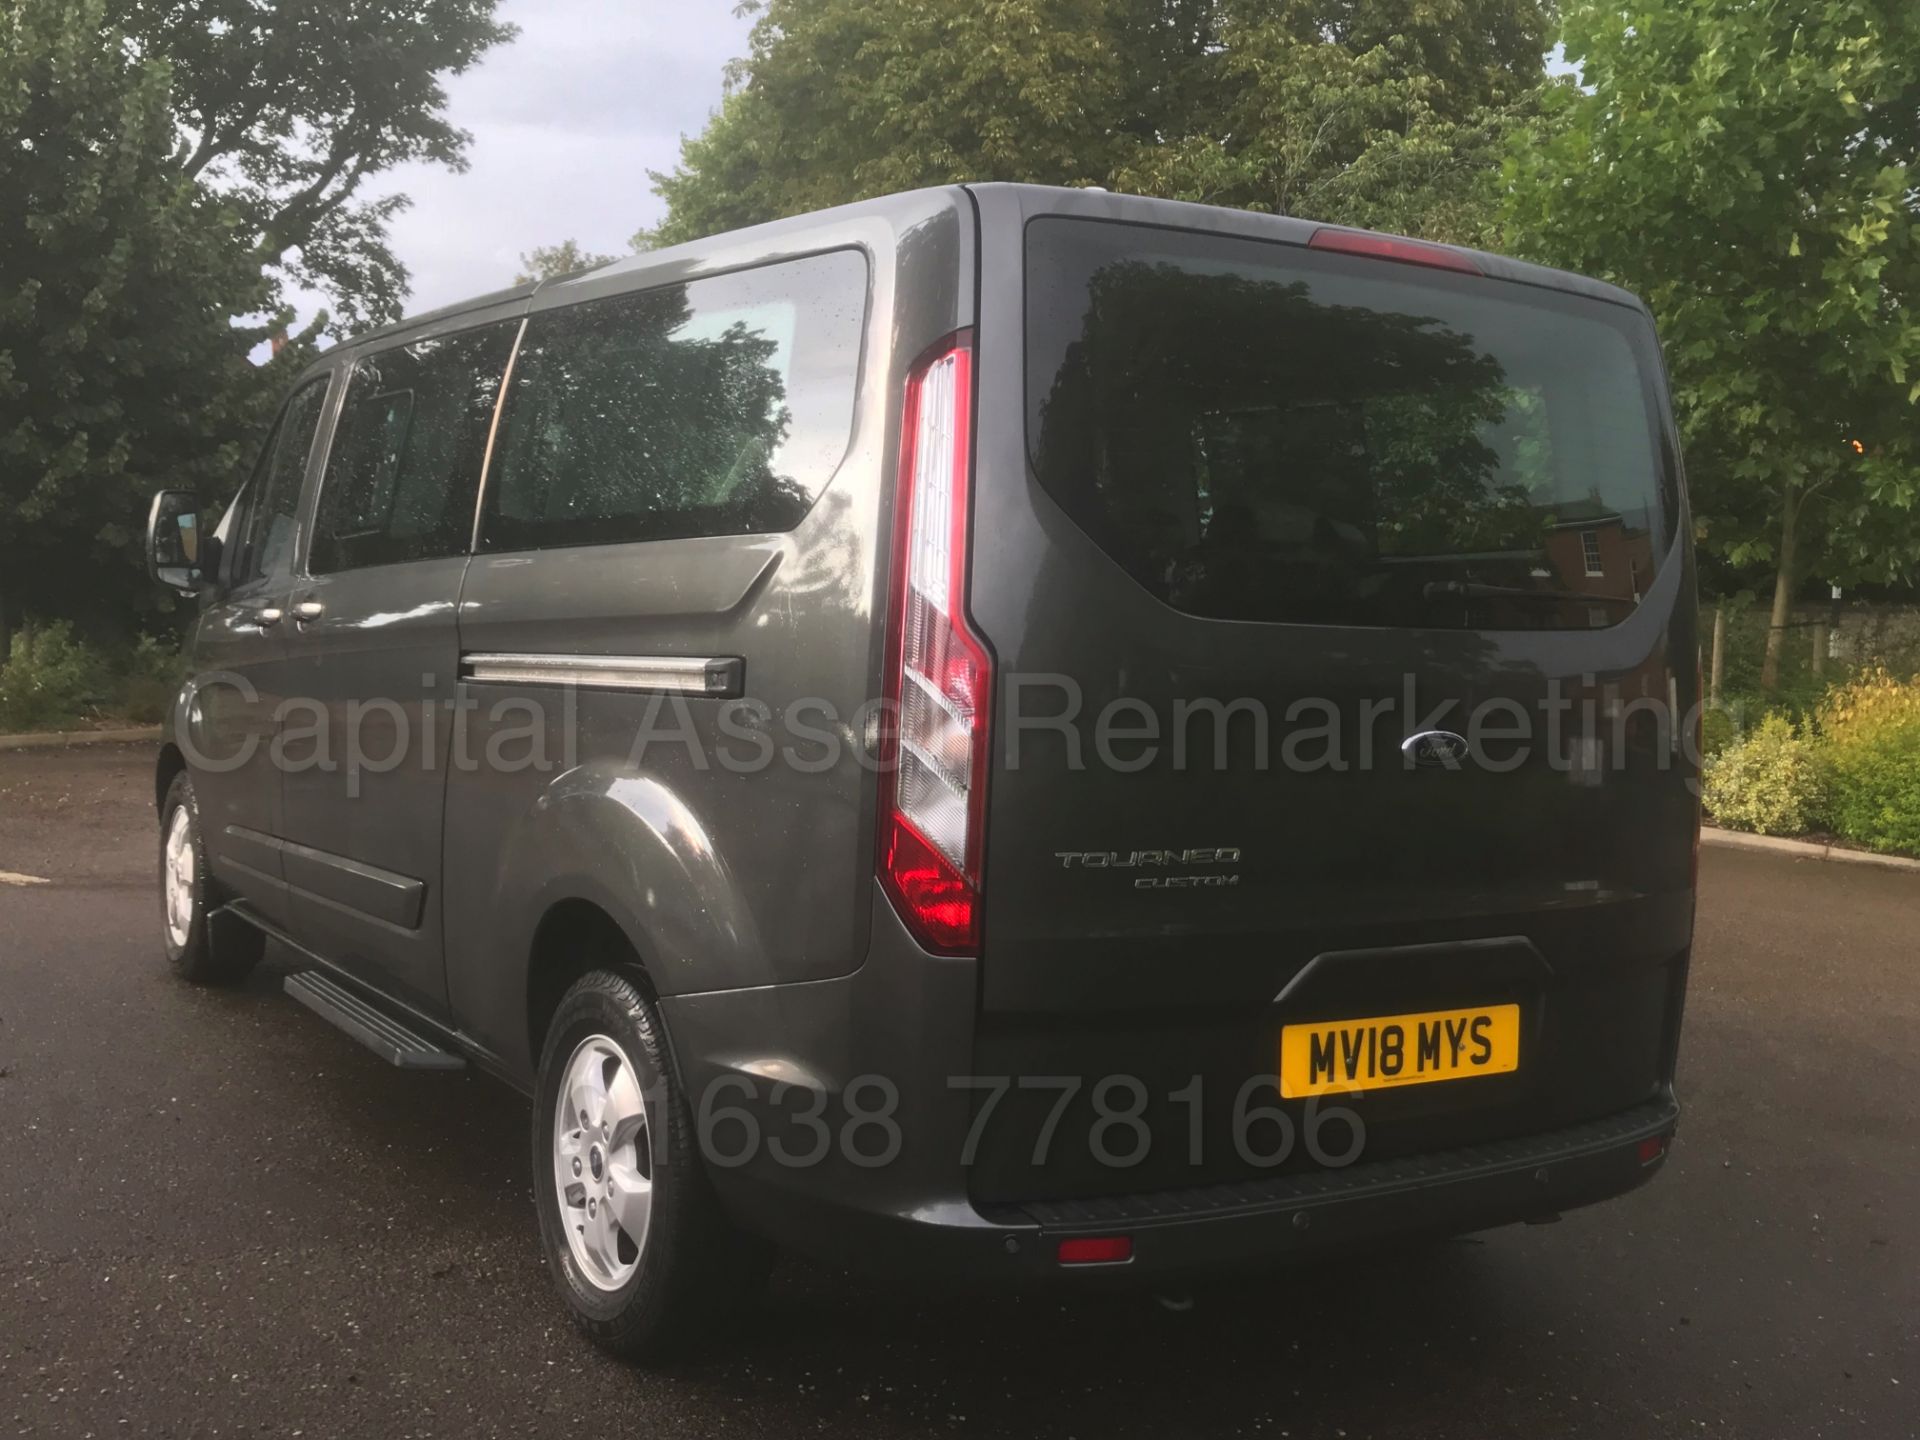 FORD TRANSIT 'TOURNEO' *TITANIUM EDITION* (2018) *9 SEATER MPV* '2.0 TDCI - 6 SPEED' *LOW MILES* - Image 9 of 62